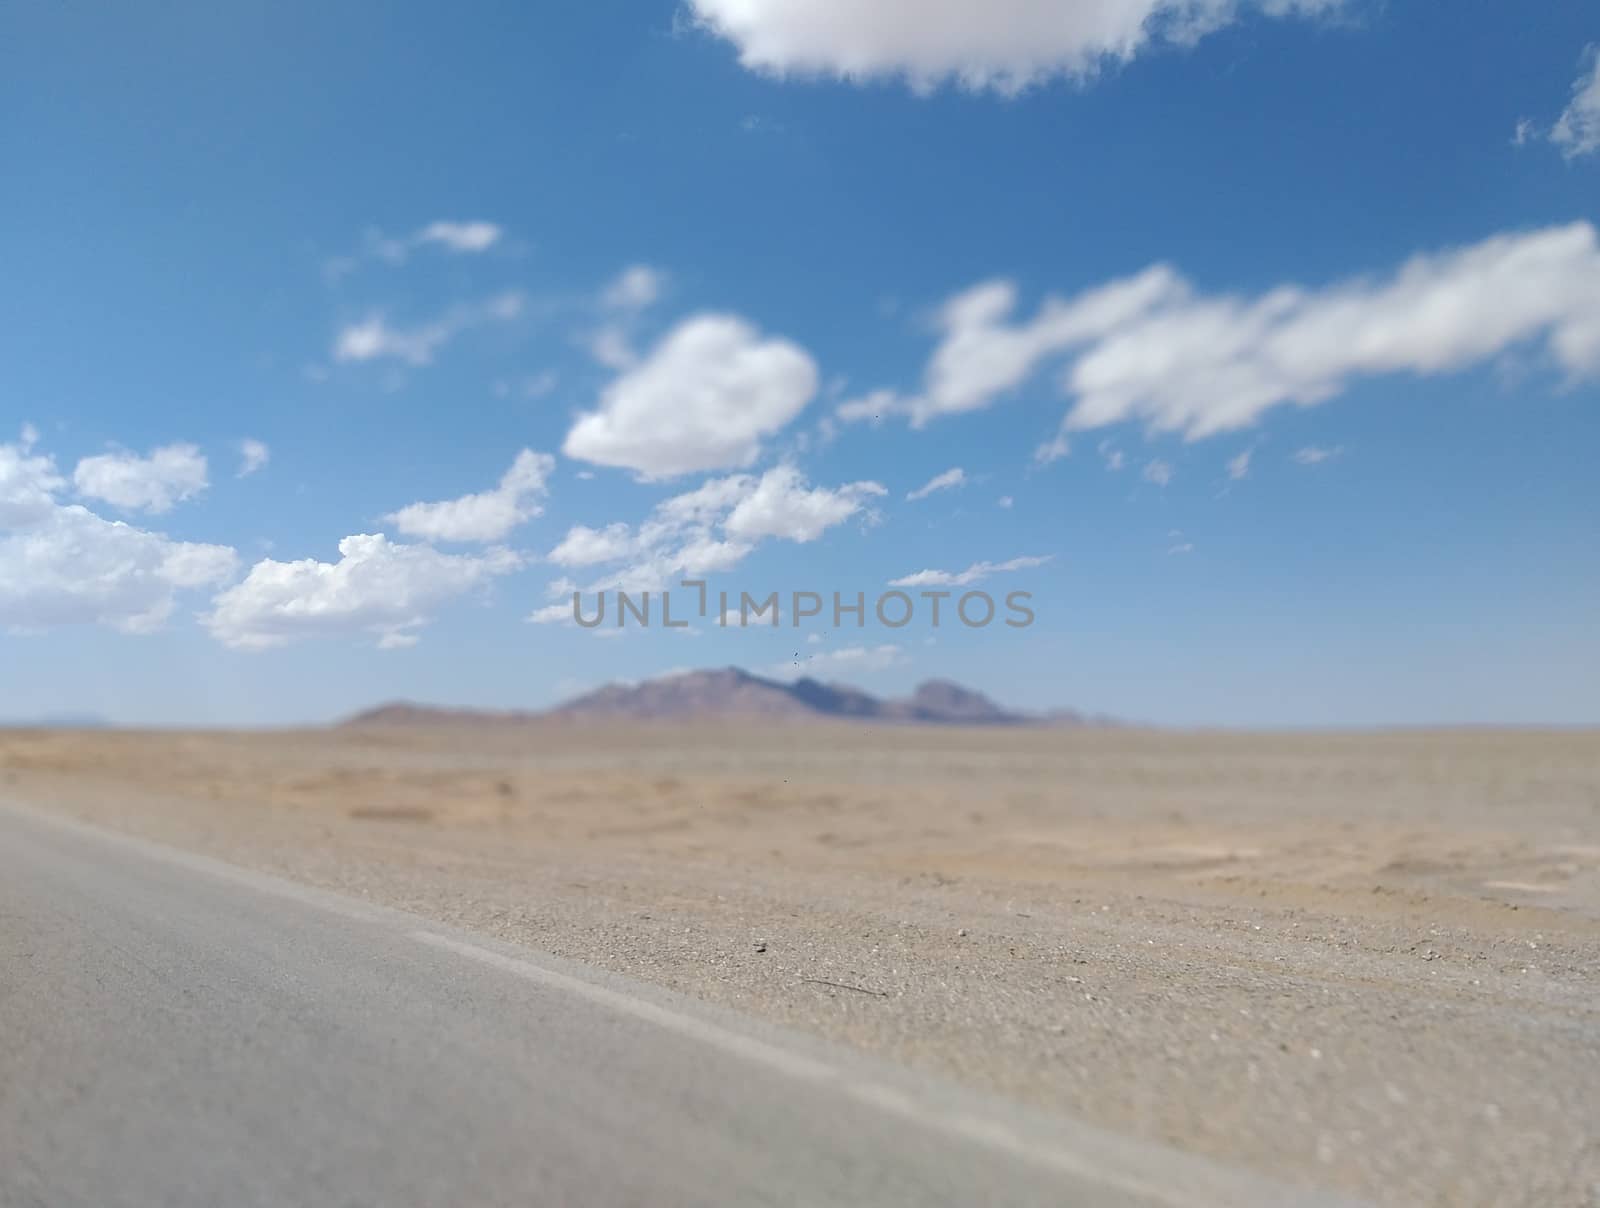 As I was surfing in a beautiful desert area around Yazd province, the glory, the silence and the purity of this unique scene grab my attention.